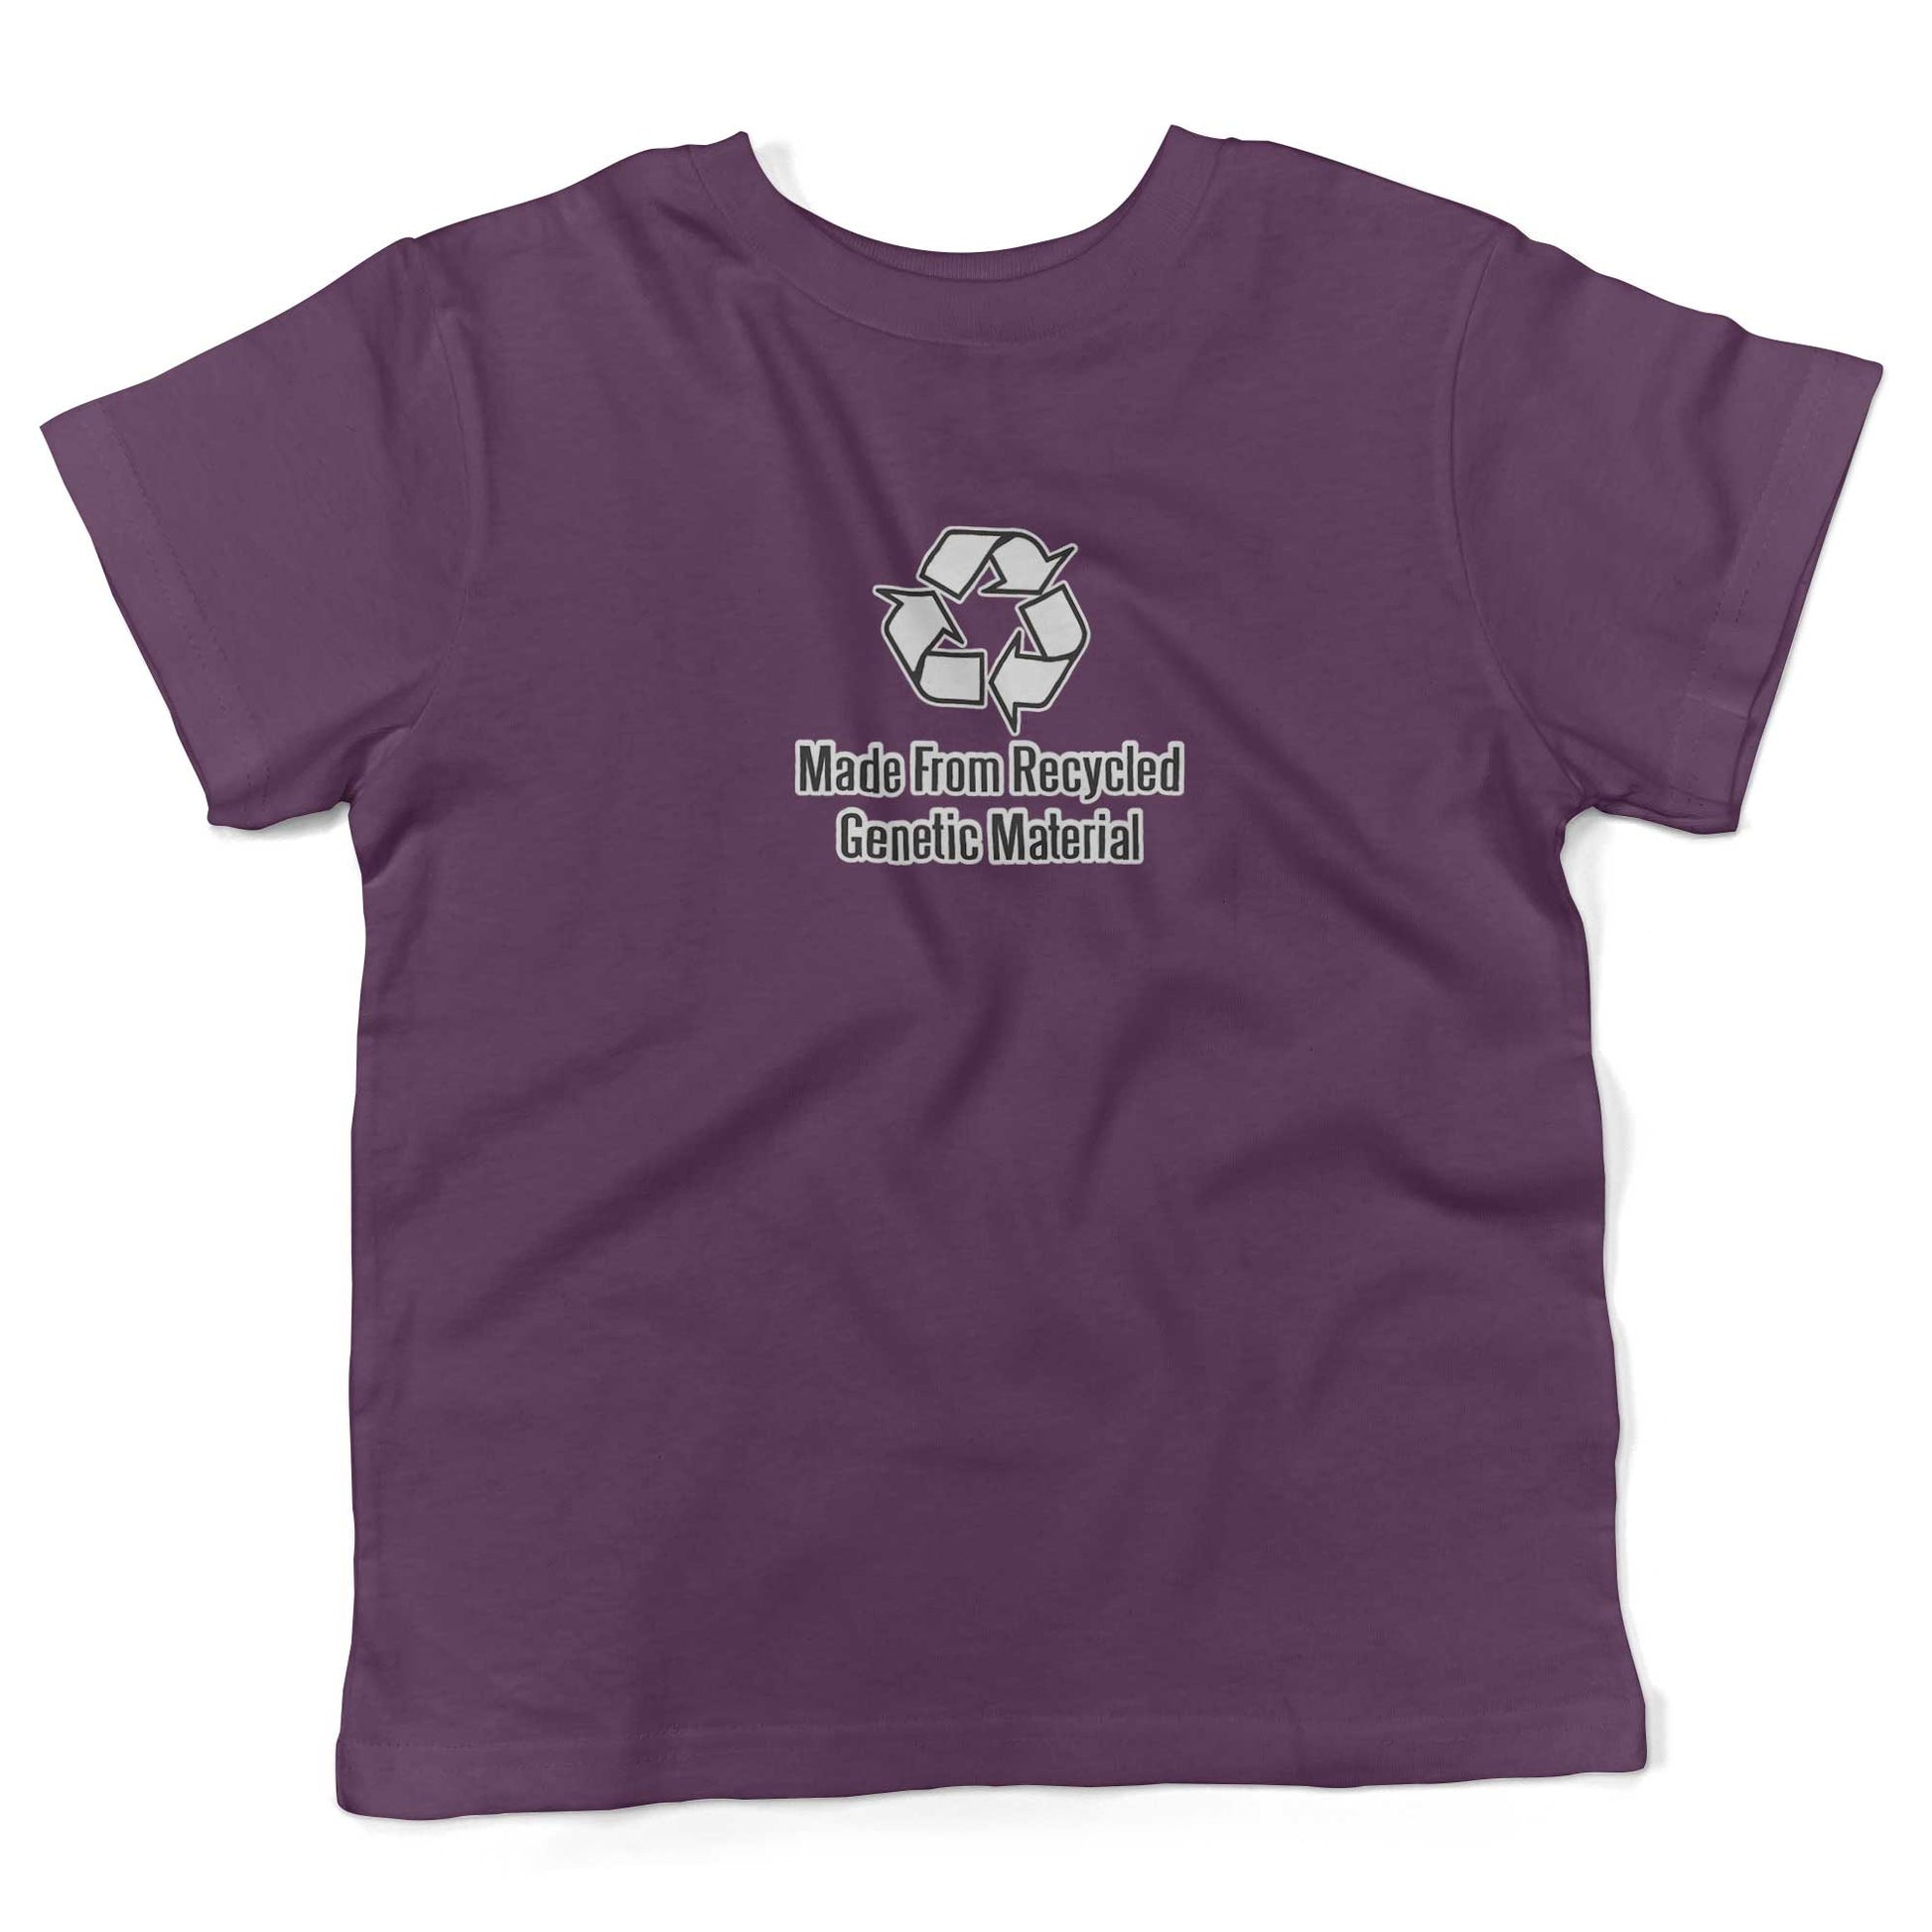 Made From Recycled Materials Toddler Shirt-Organic Purple-2T